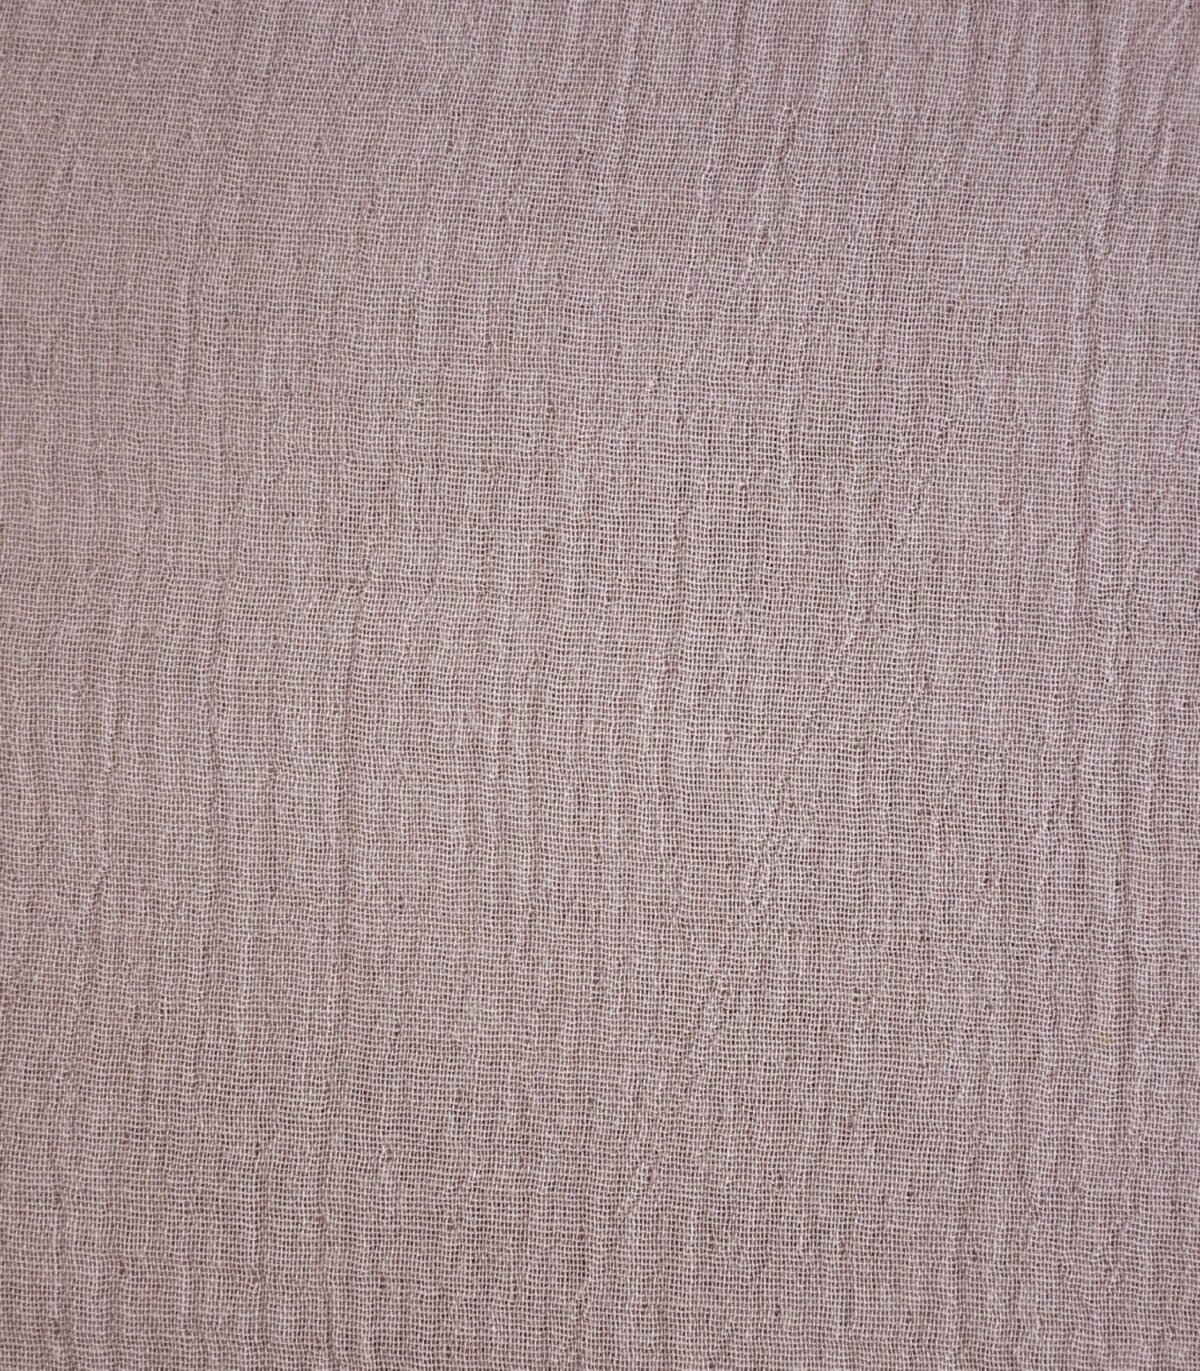 Cotton Light Rose Double Cloth Dyed Fabric